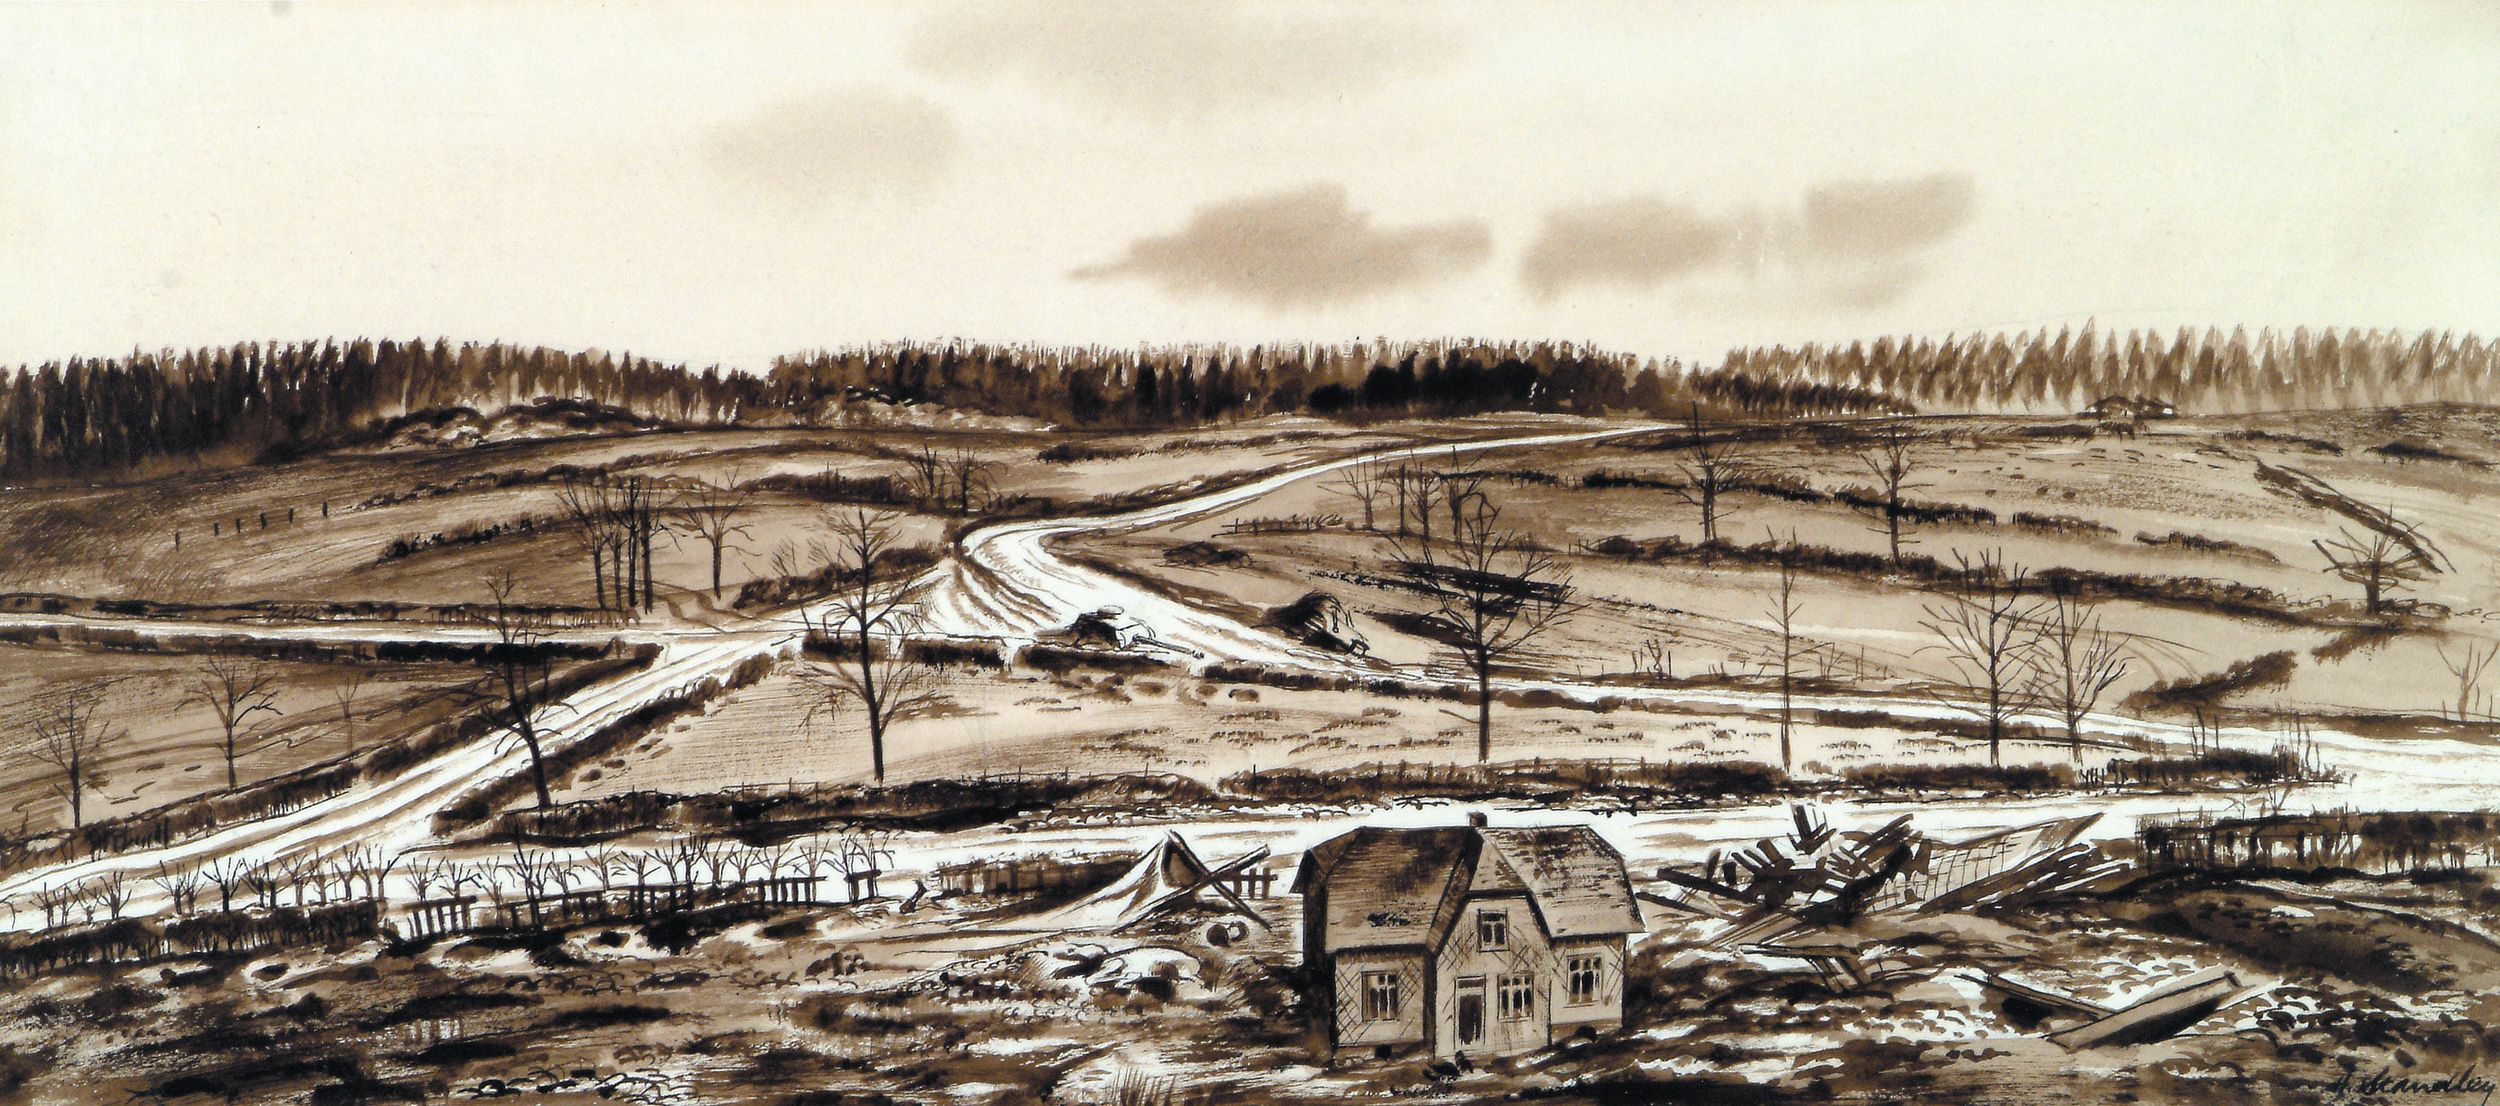 U.S. Army combat artist Harrison S. Standley preserved the wartime look of the crossroads at Lausdell and the Palm farmhouse where a heroic stand was made against the advancing Germans on December 17-18, 1944.